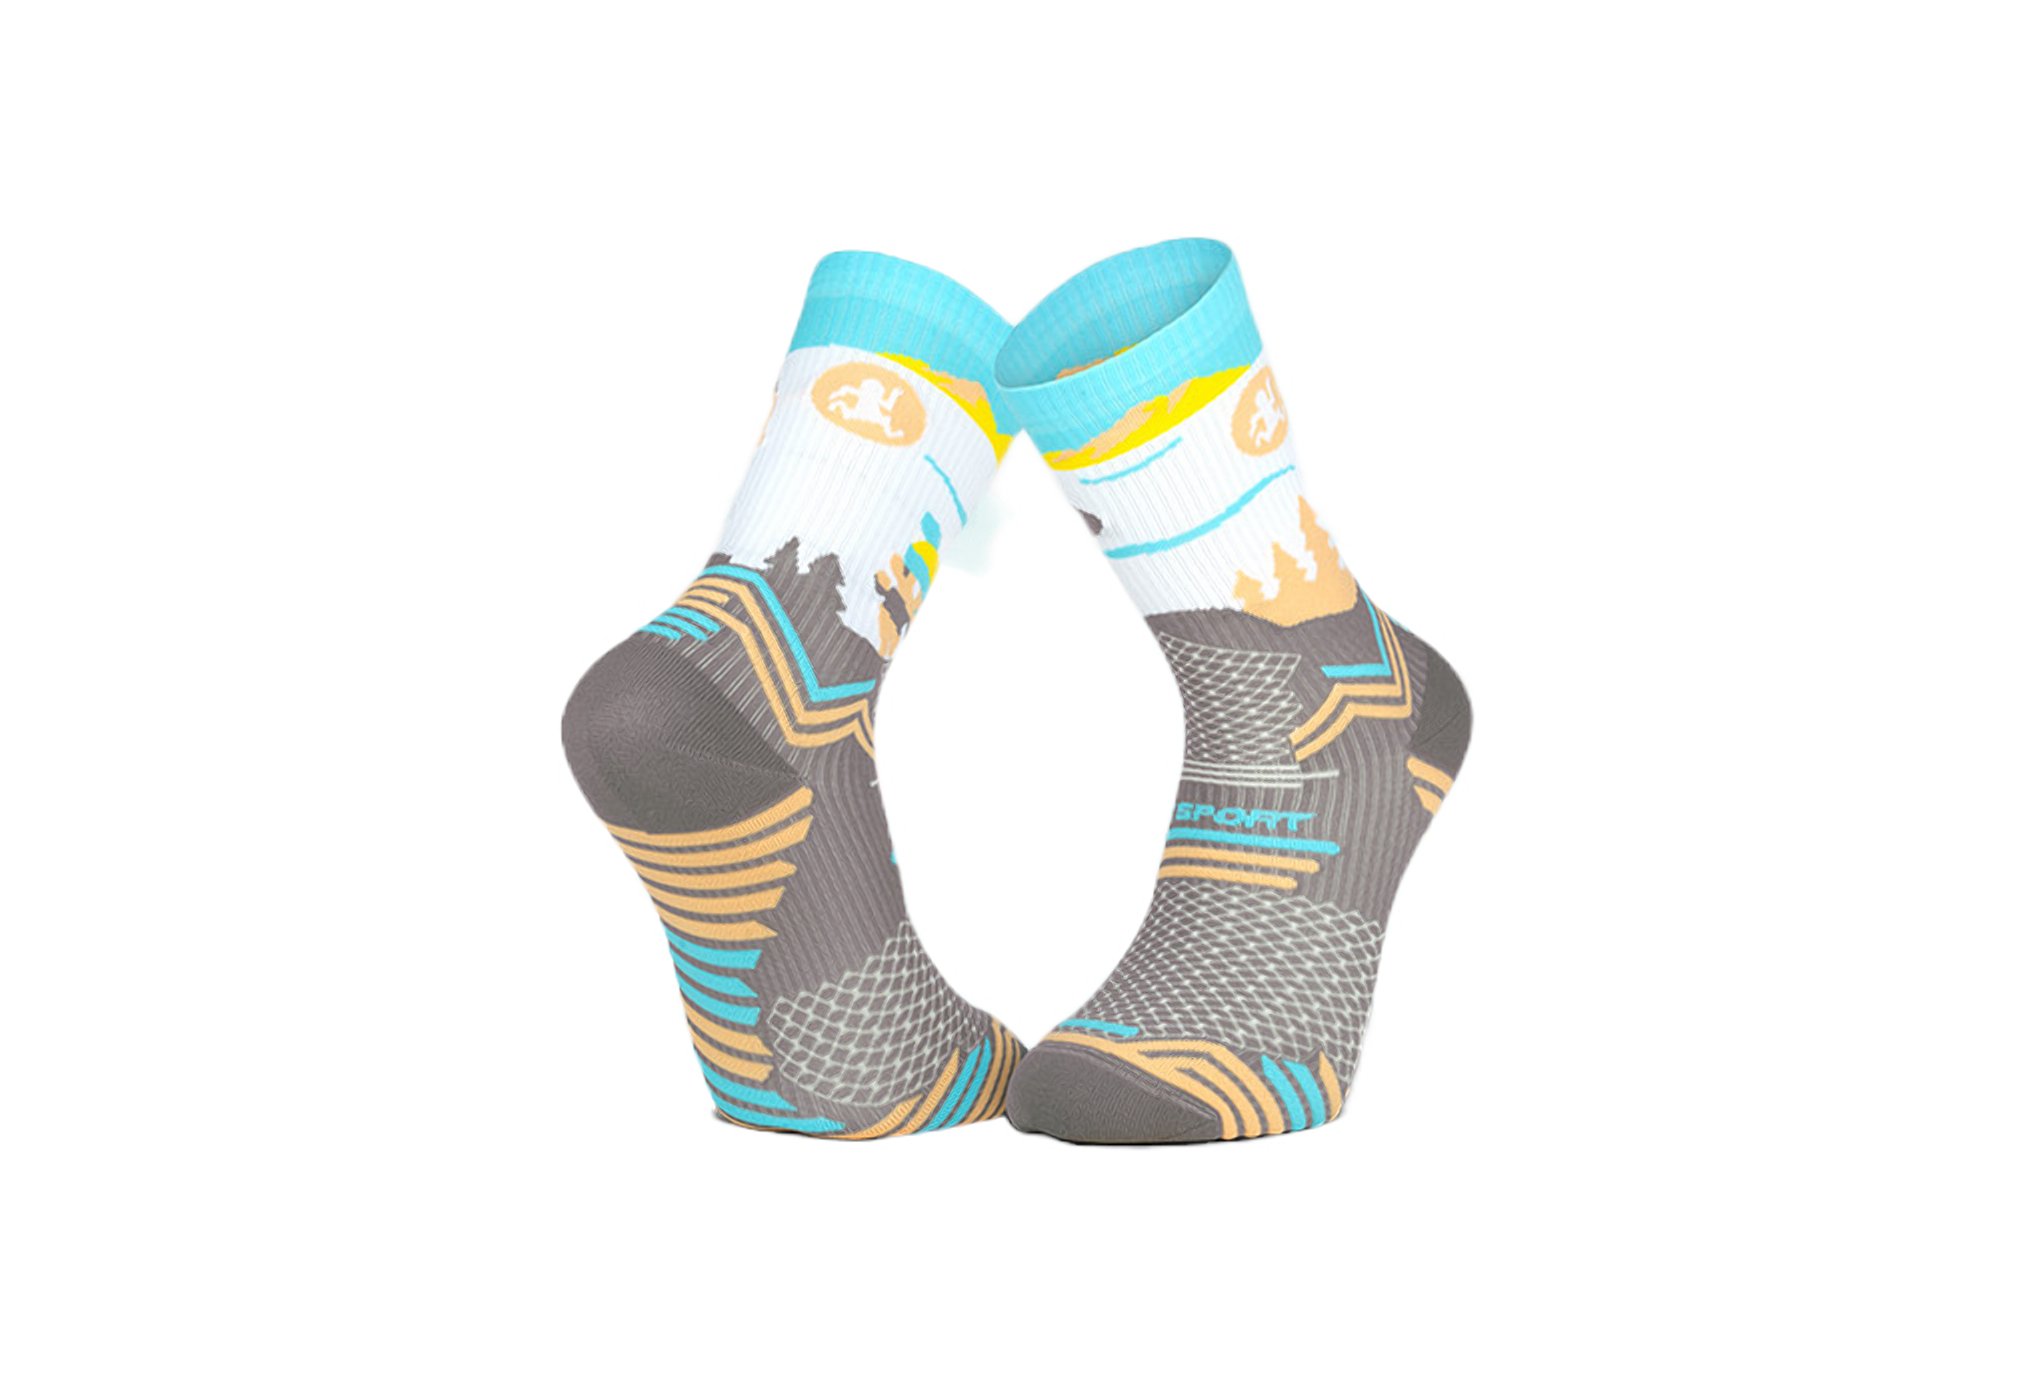 BV Sport Trail Ultra Collector DBDB Chaussettes